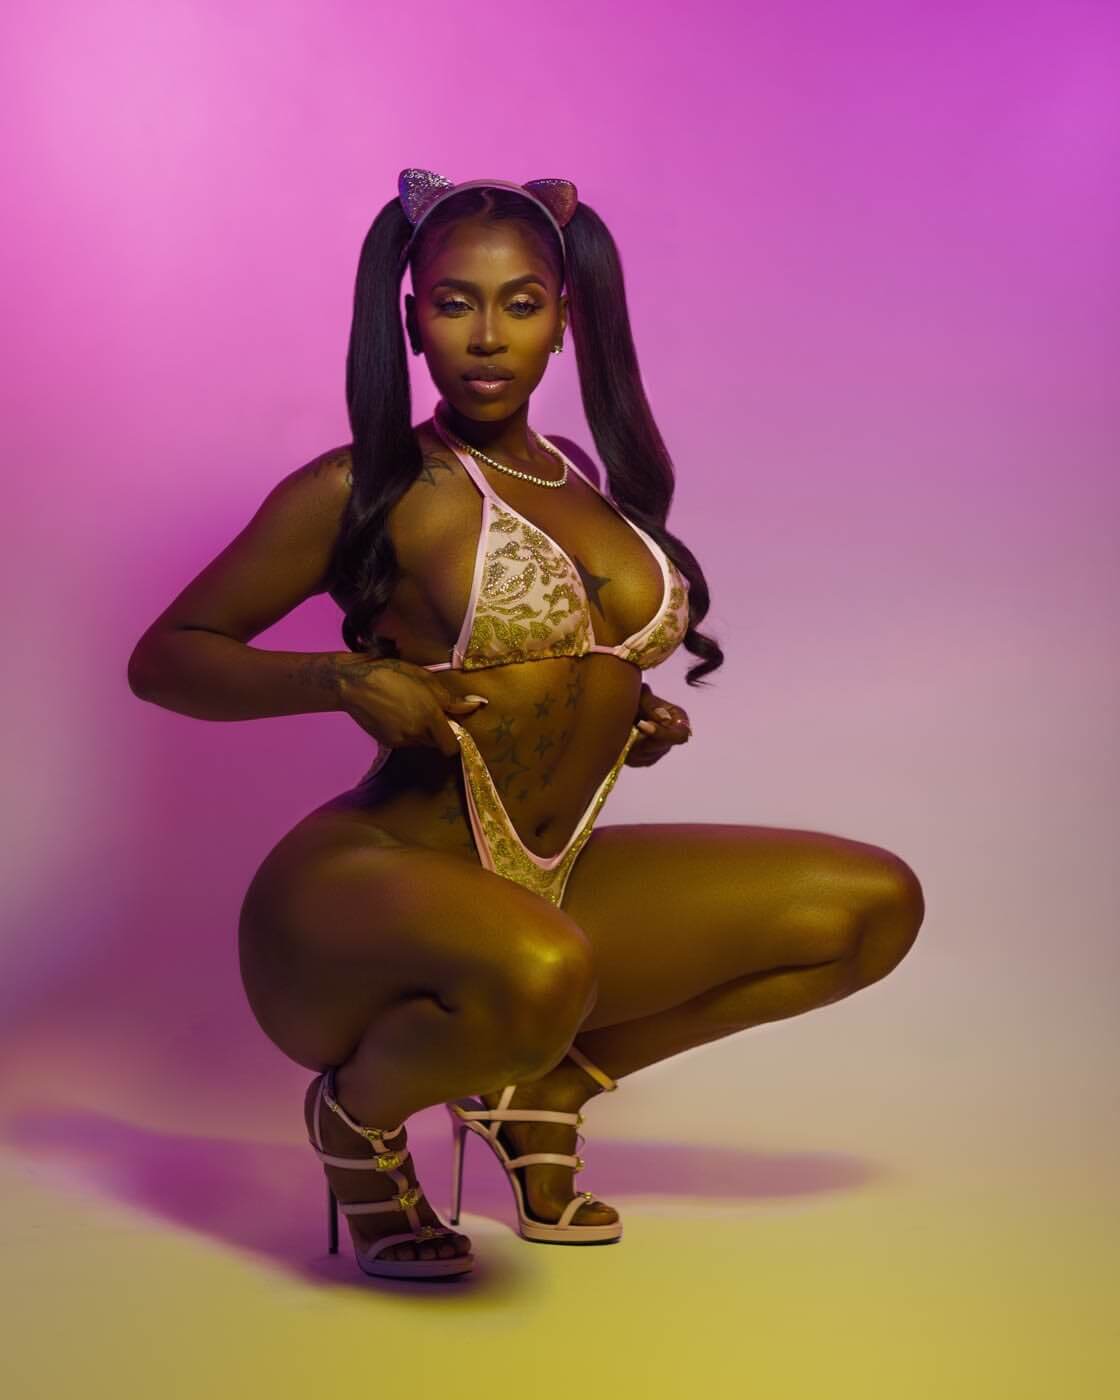 50 Sexy Kash Doll Hot Pictures - 12thBlog